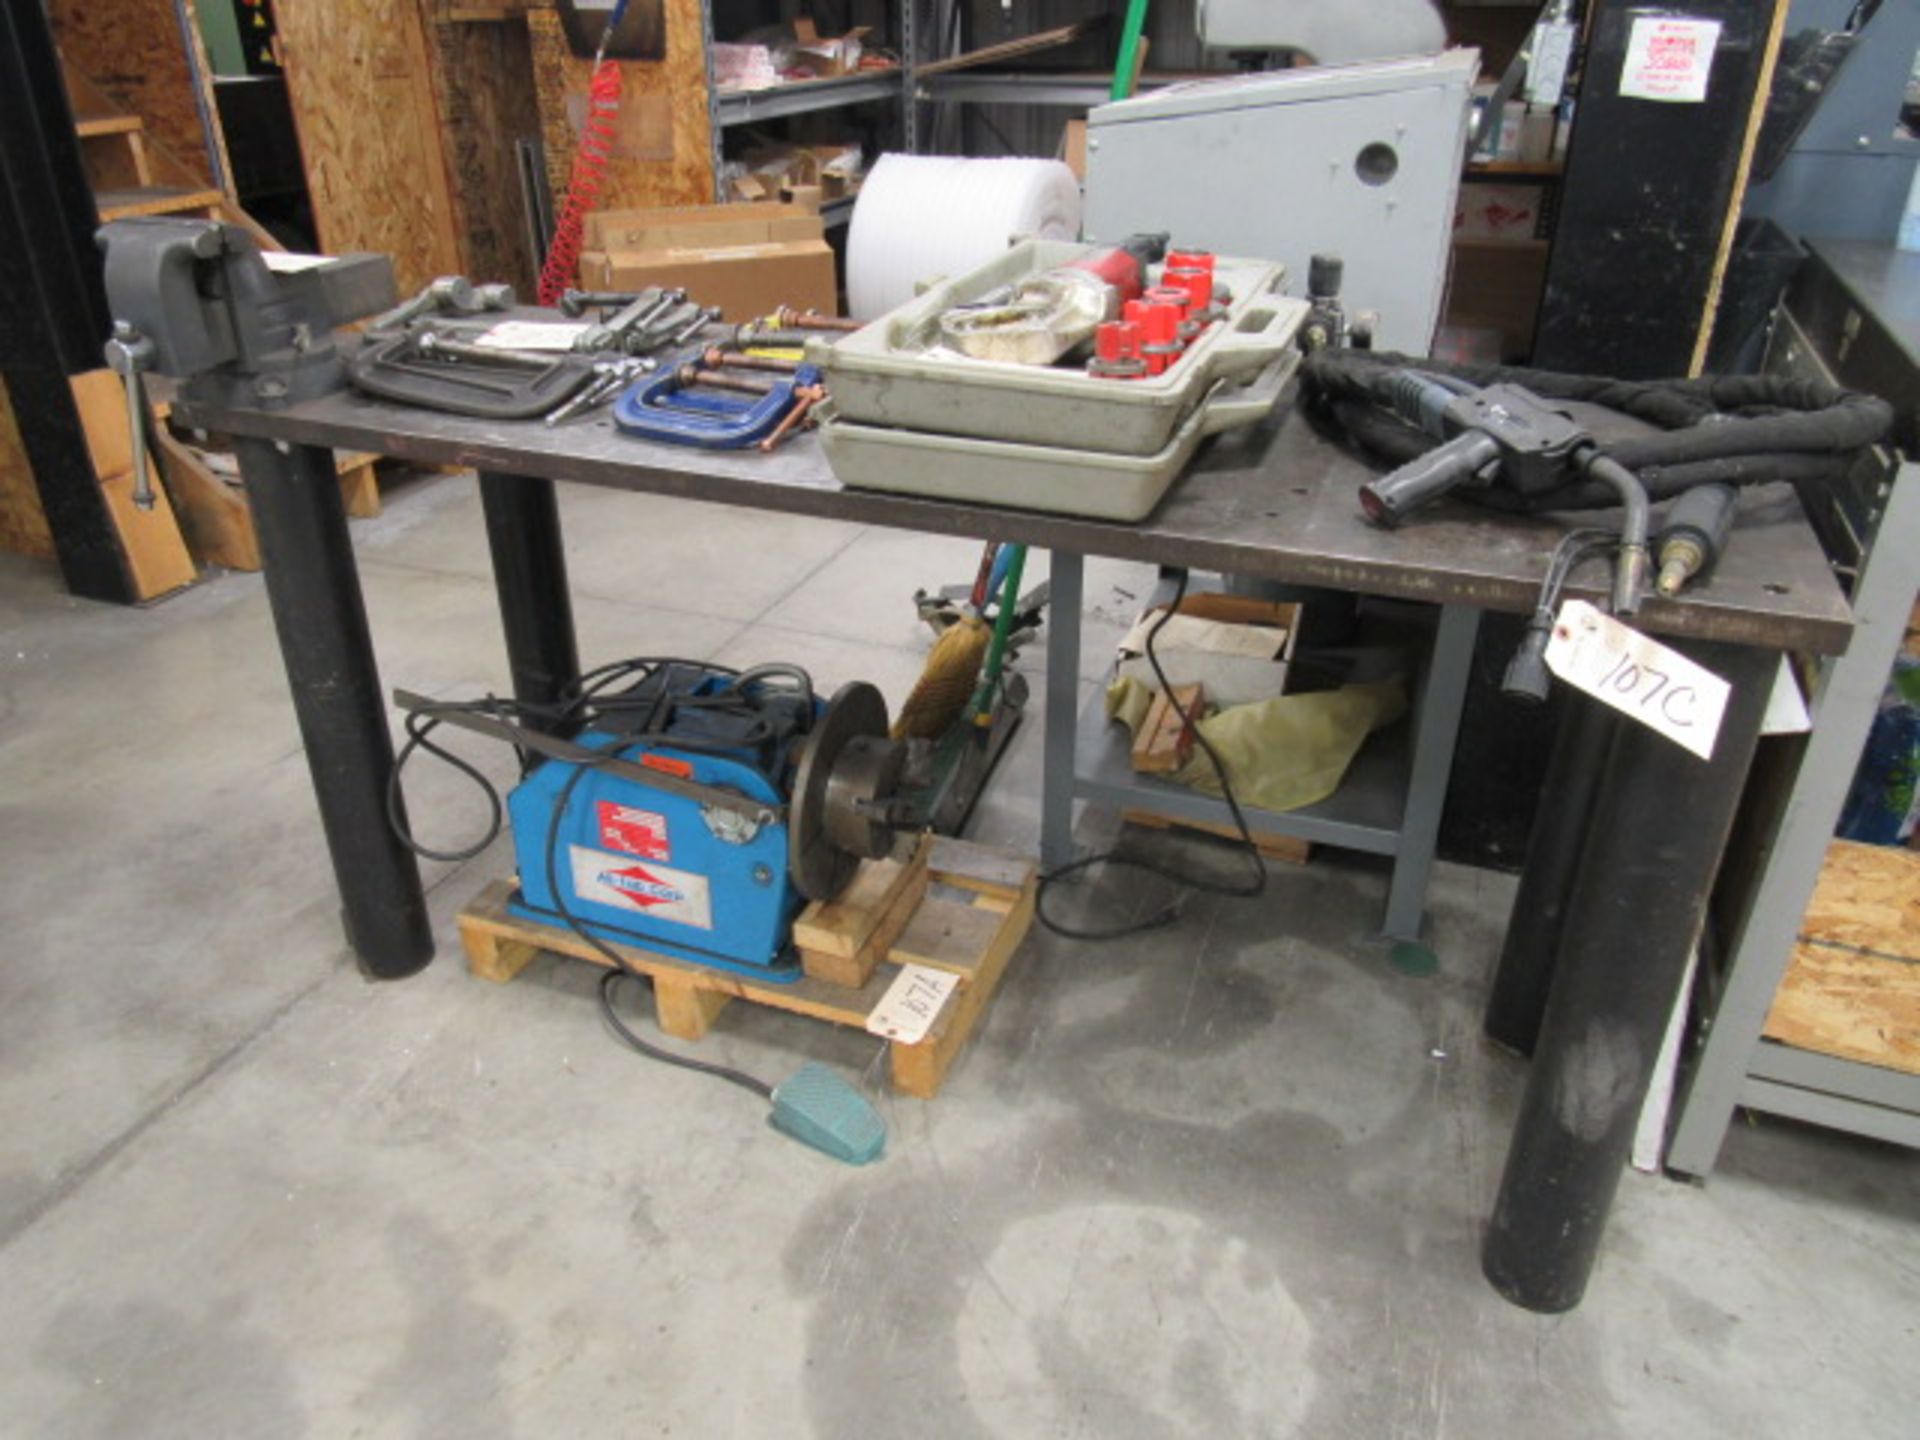 2'' Weld Table with Vise